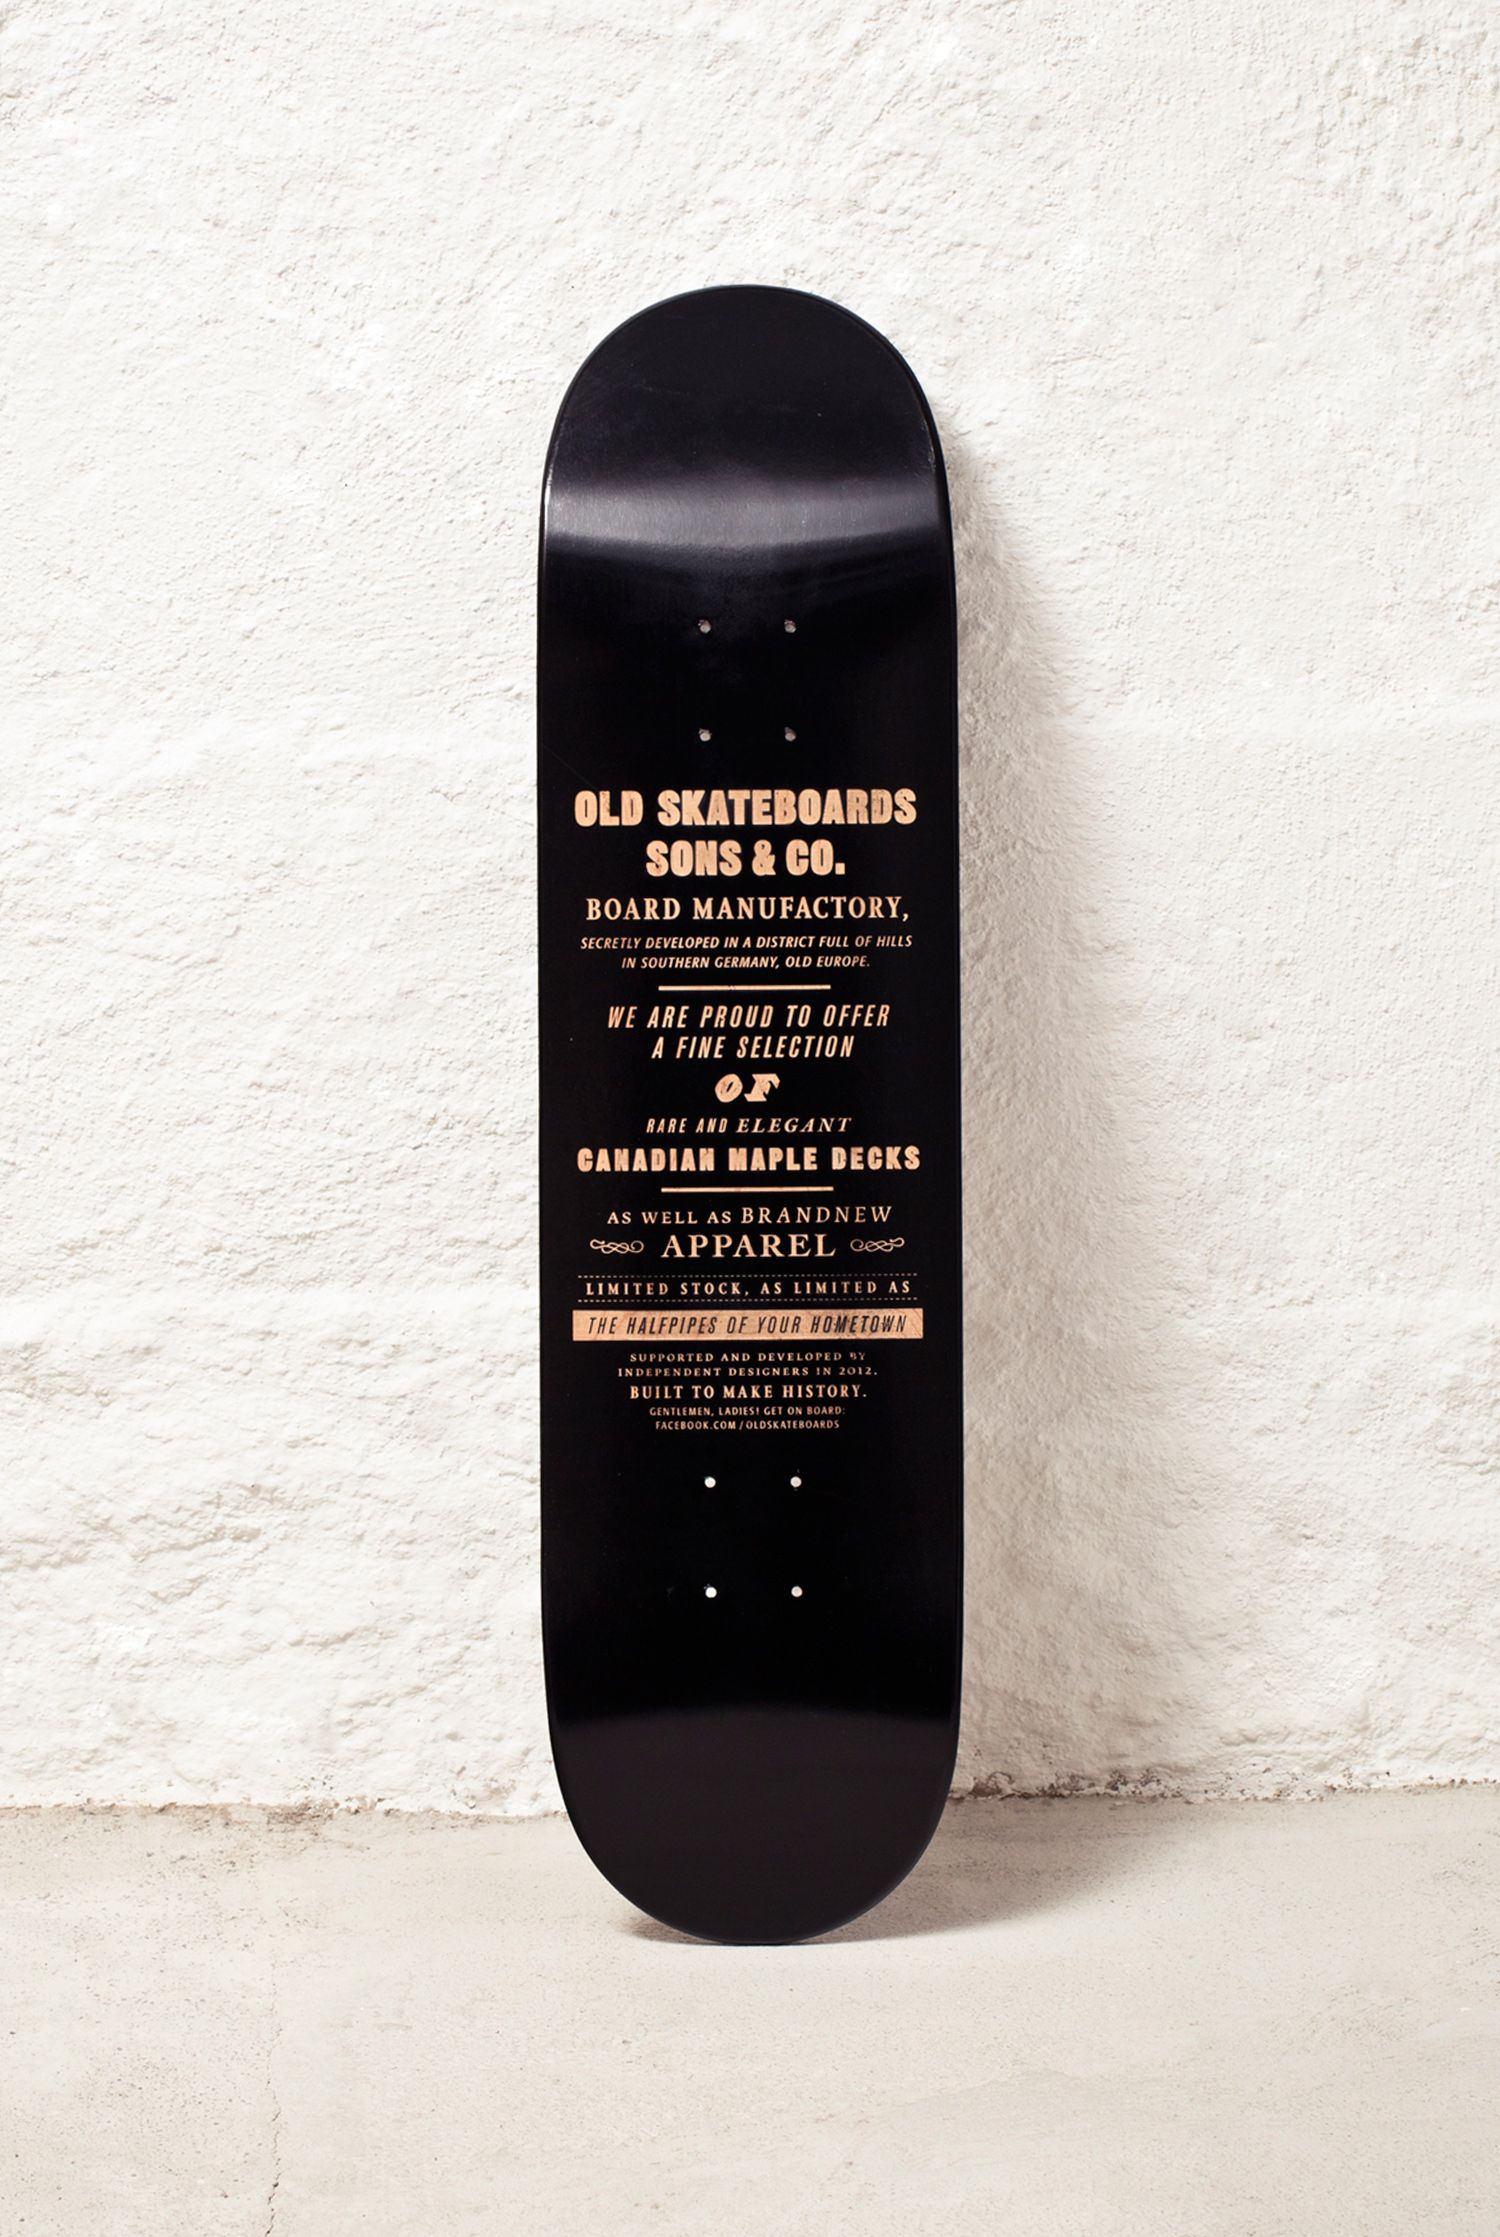 Black series by Old Skateboards